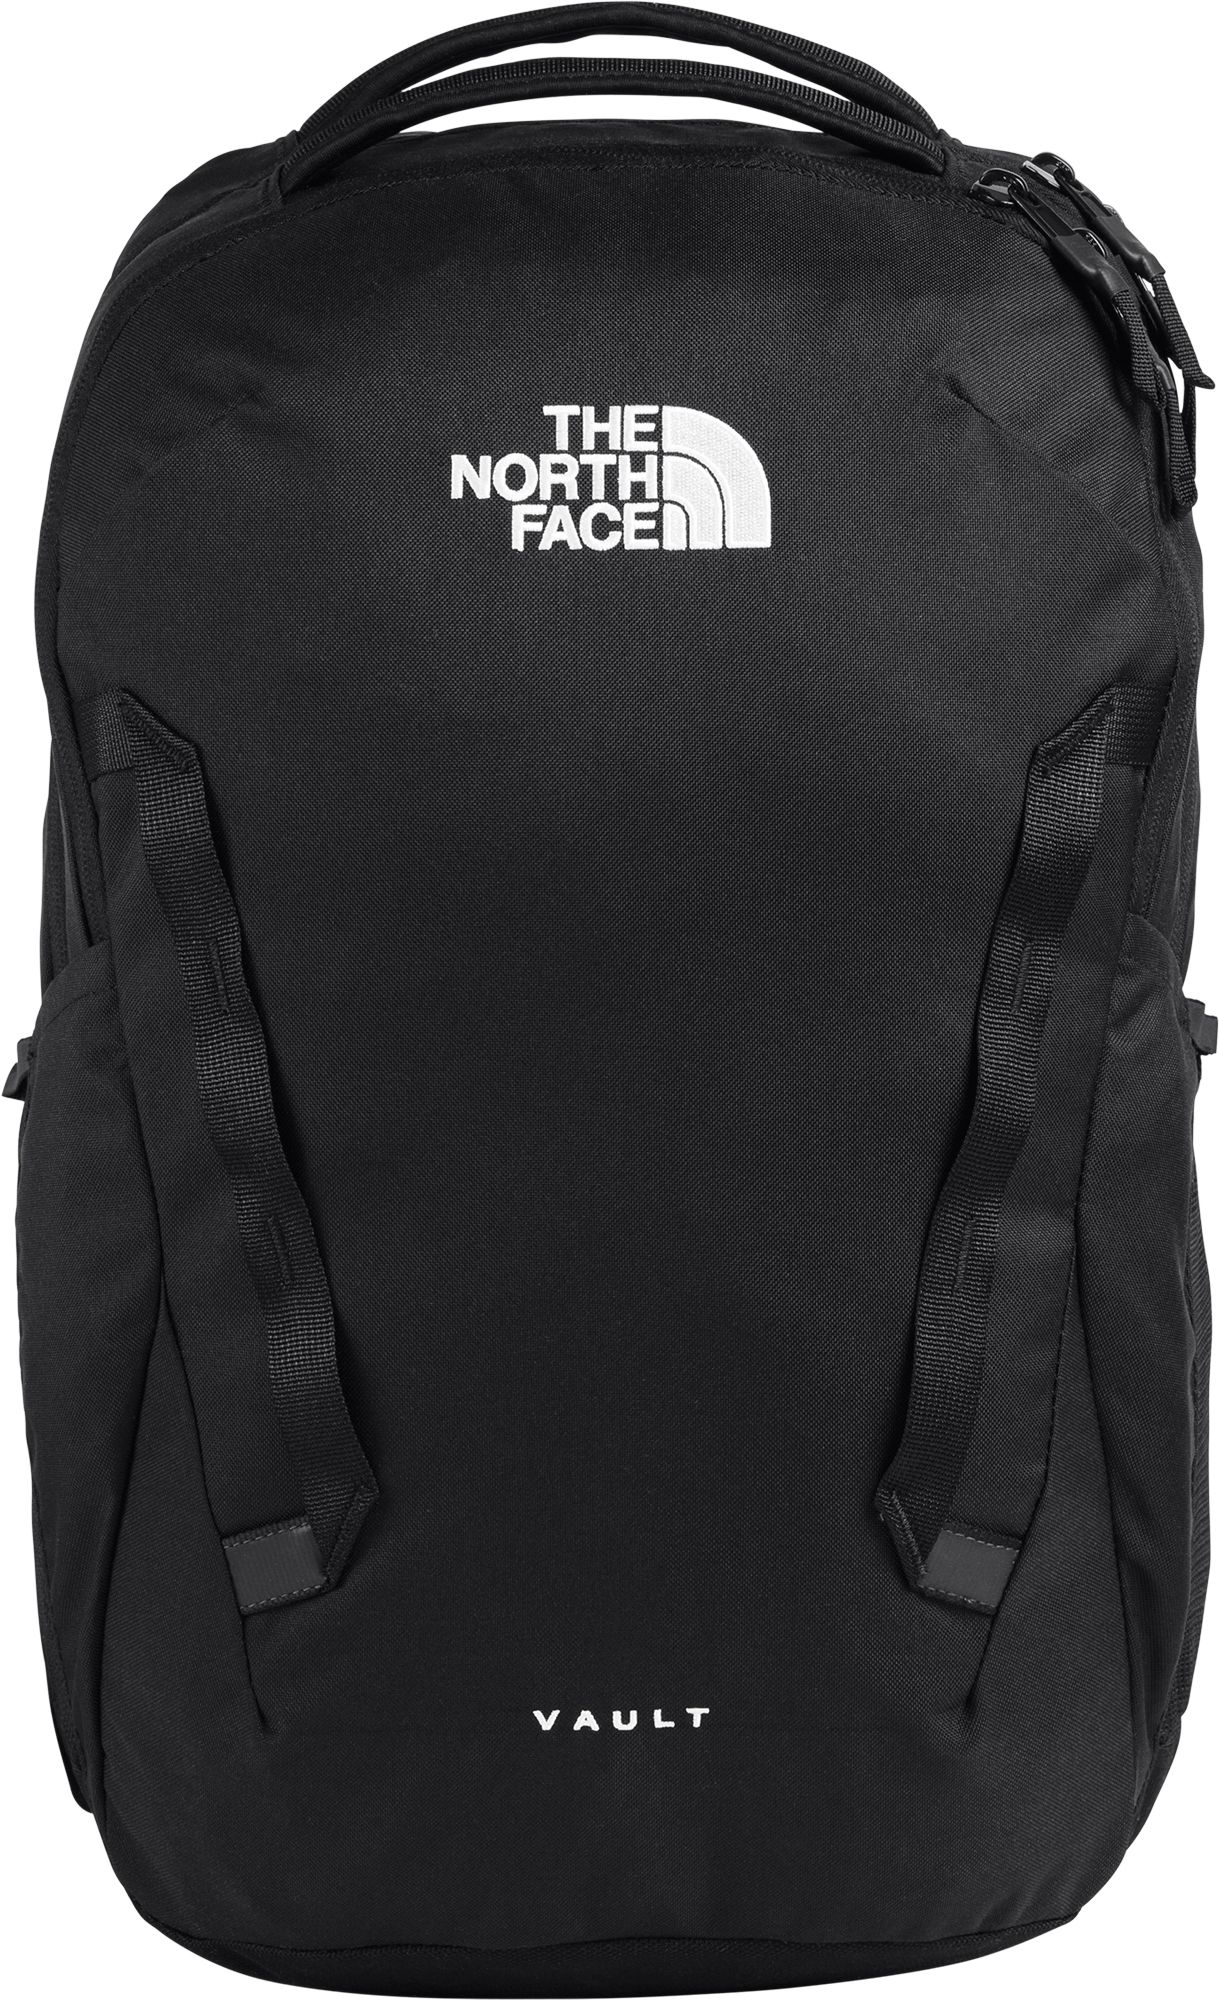 bag the north face